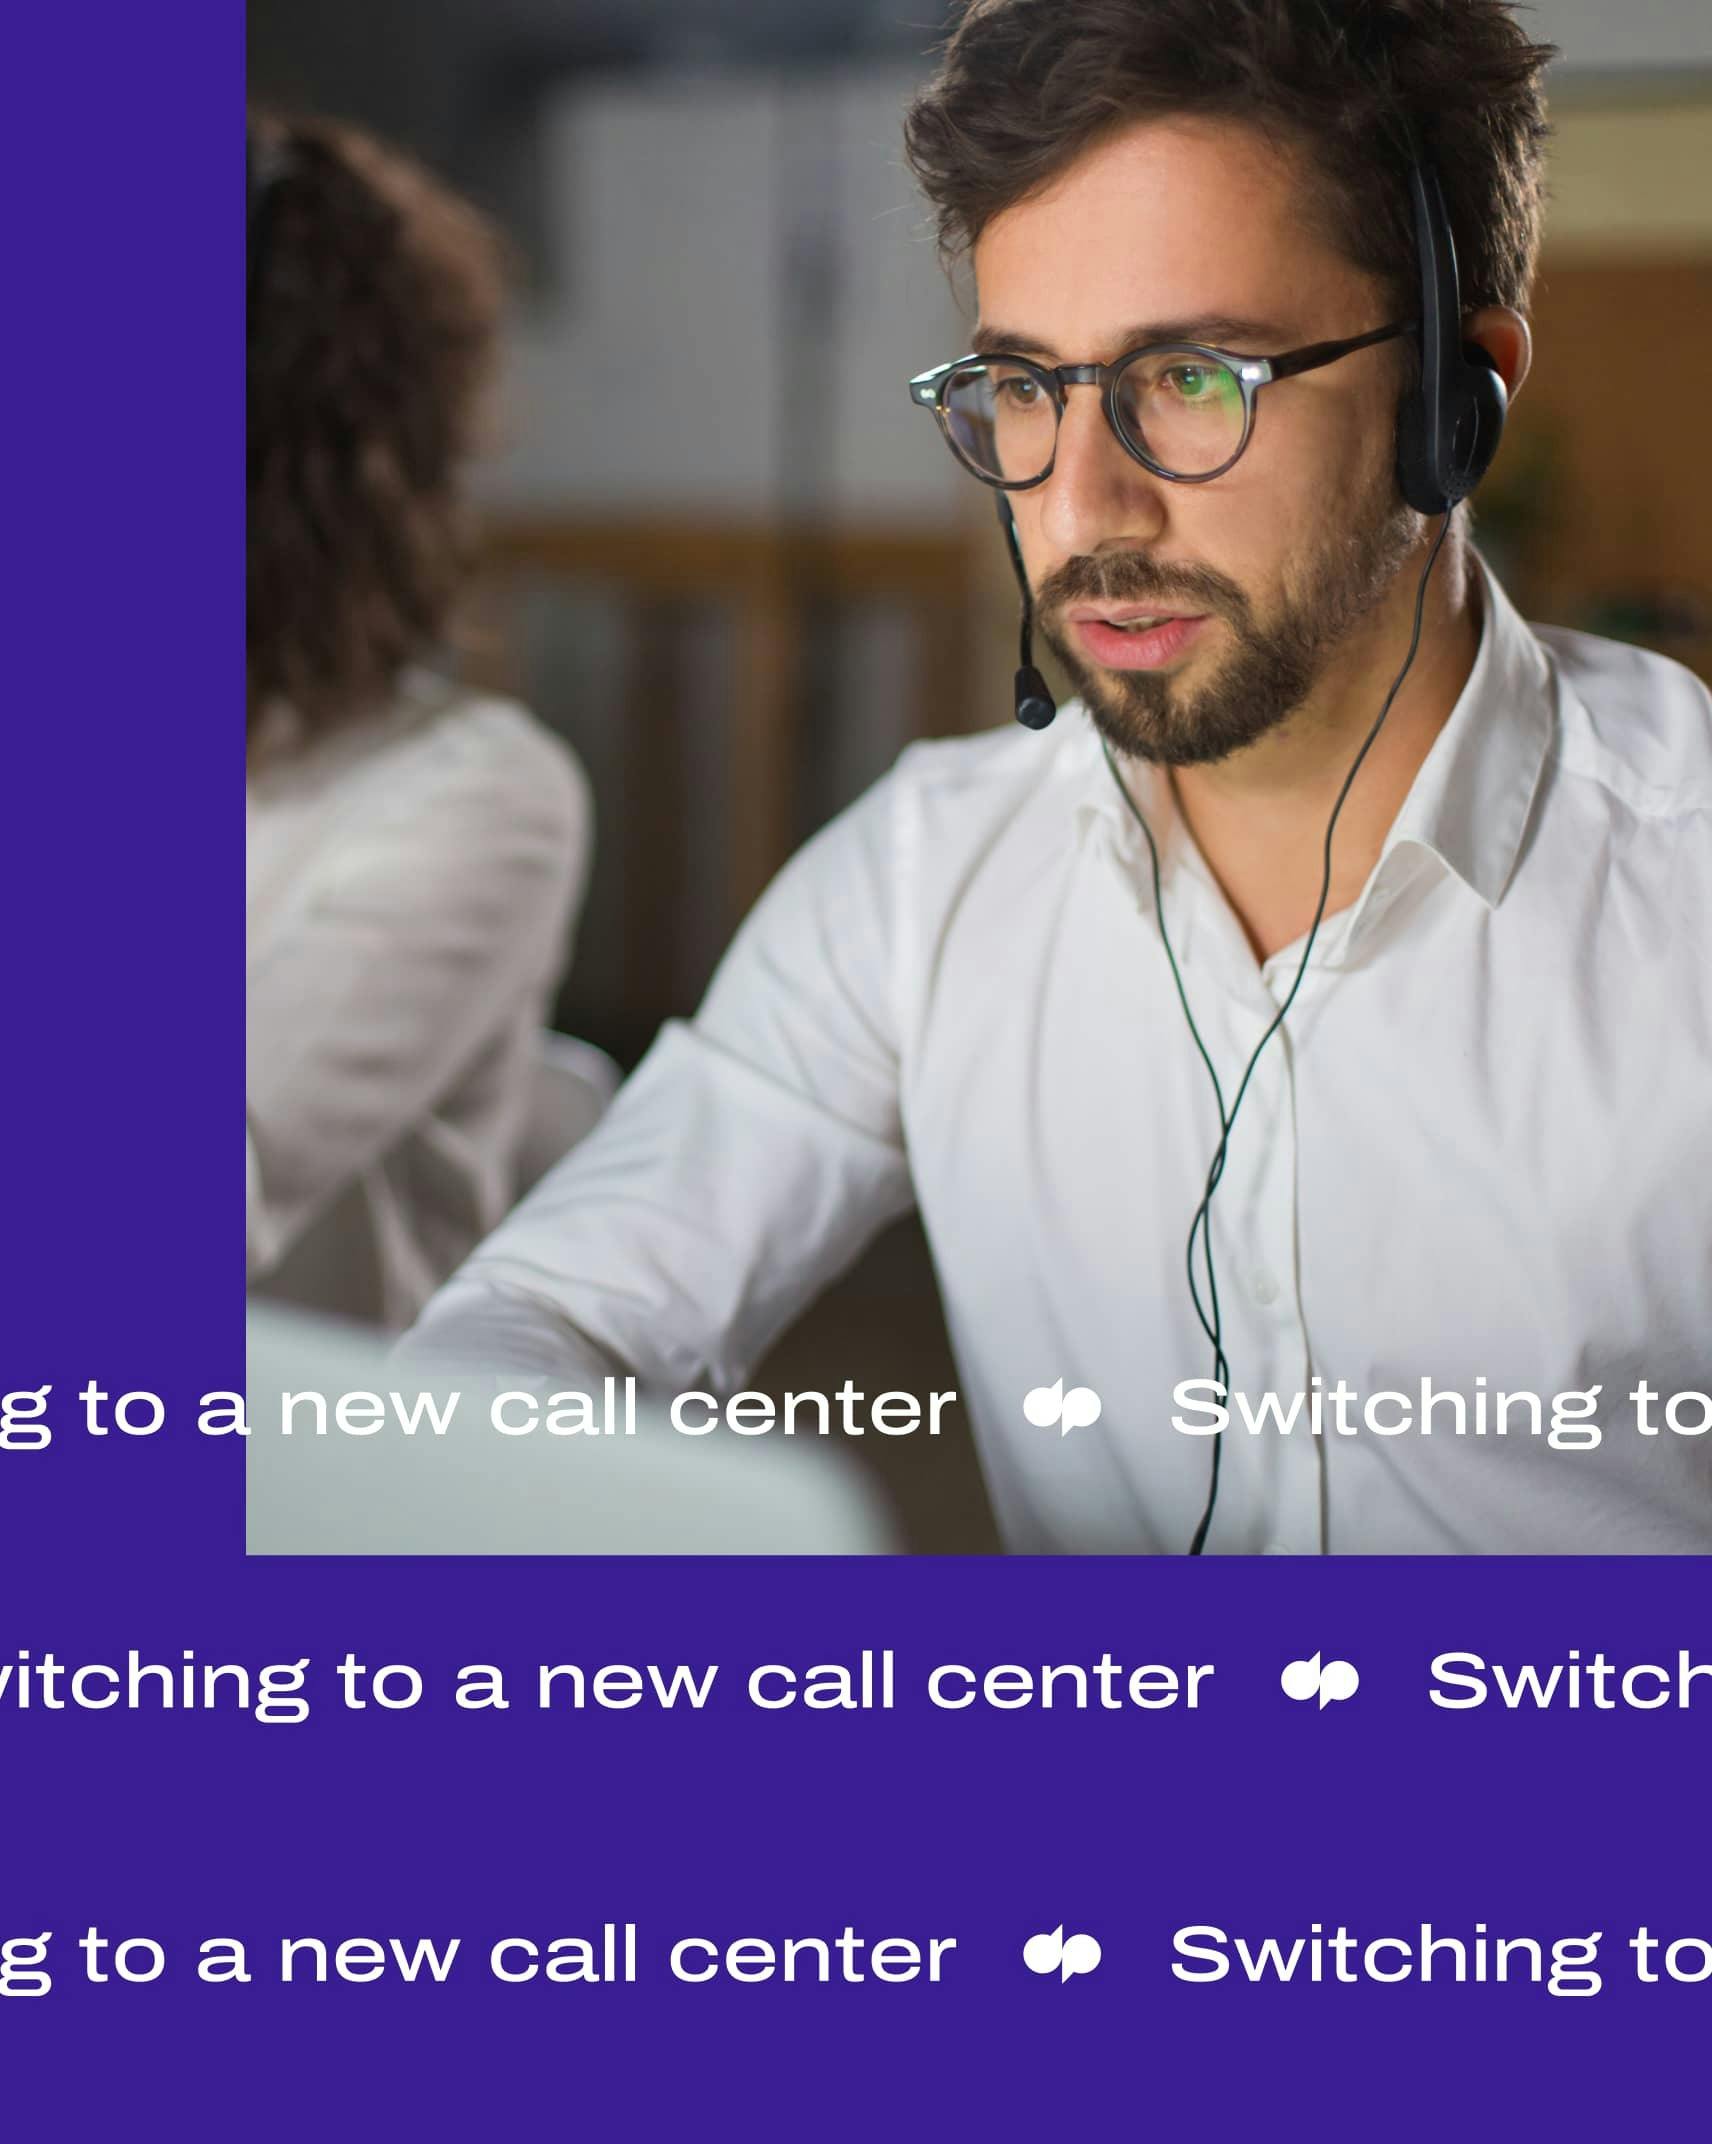 Switching to a new call center